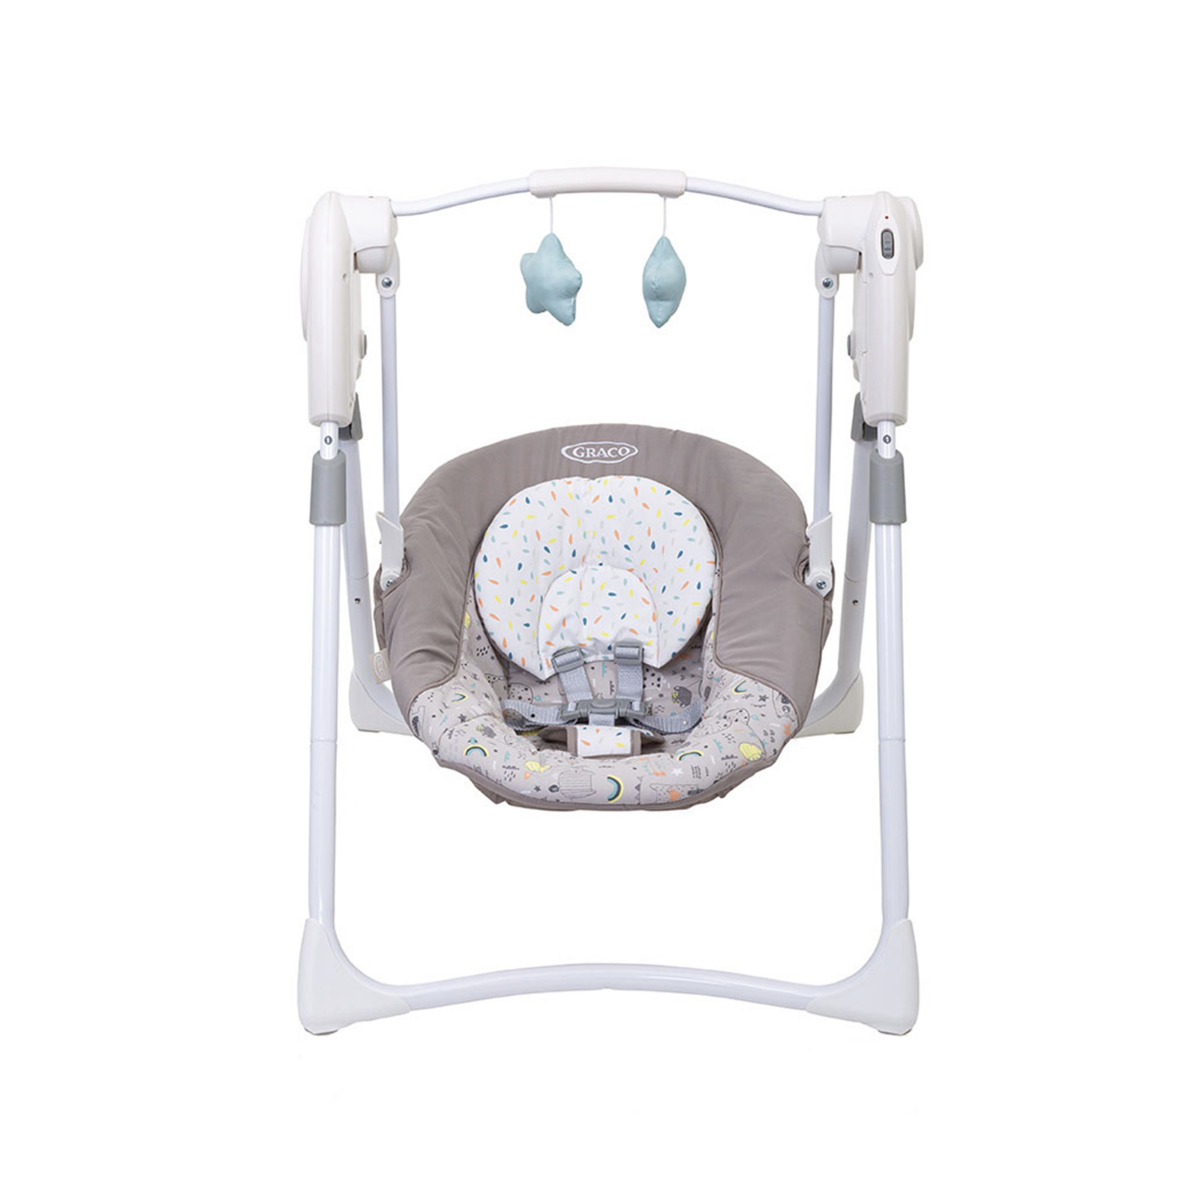 Graco Slim Spaces front angle